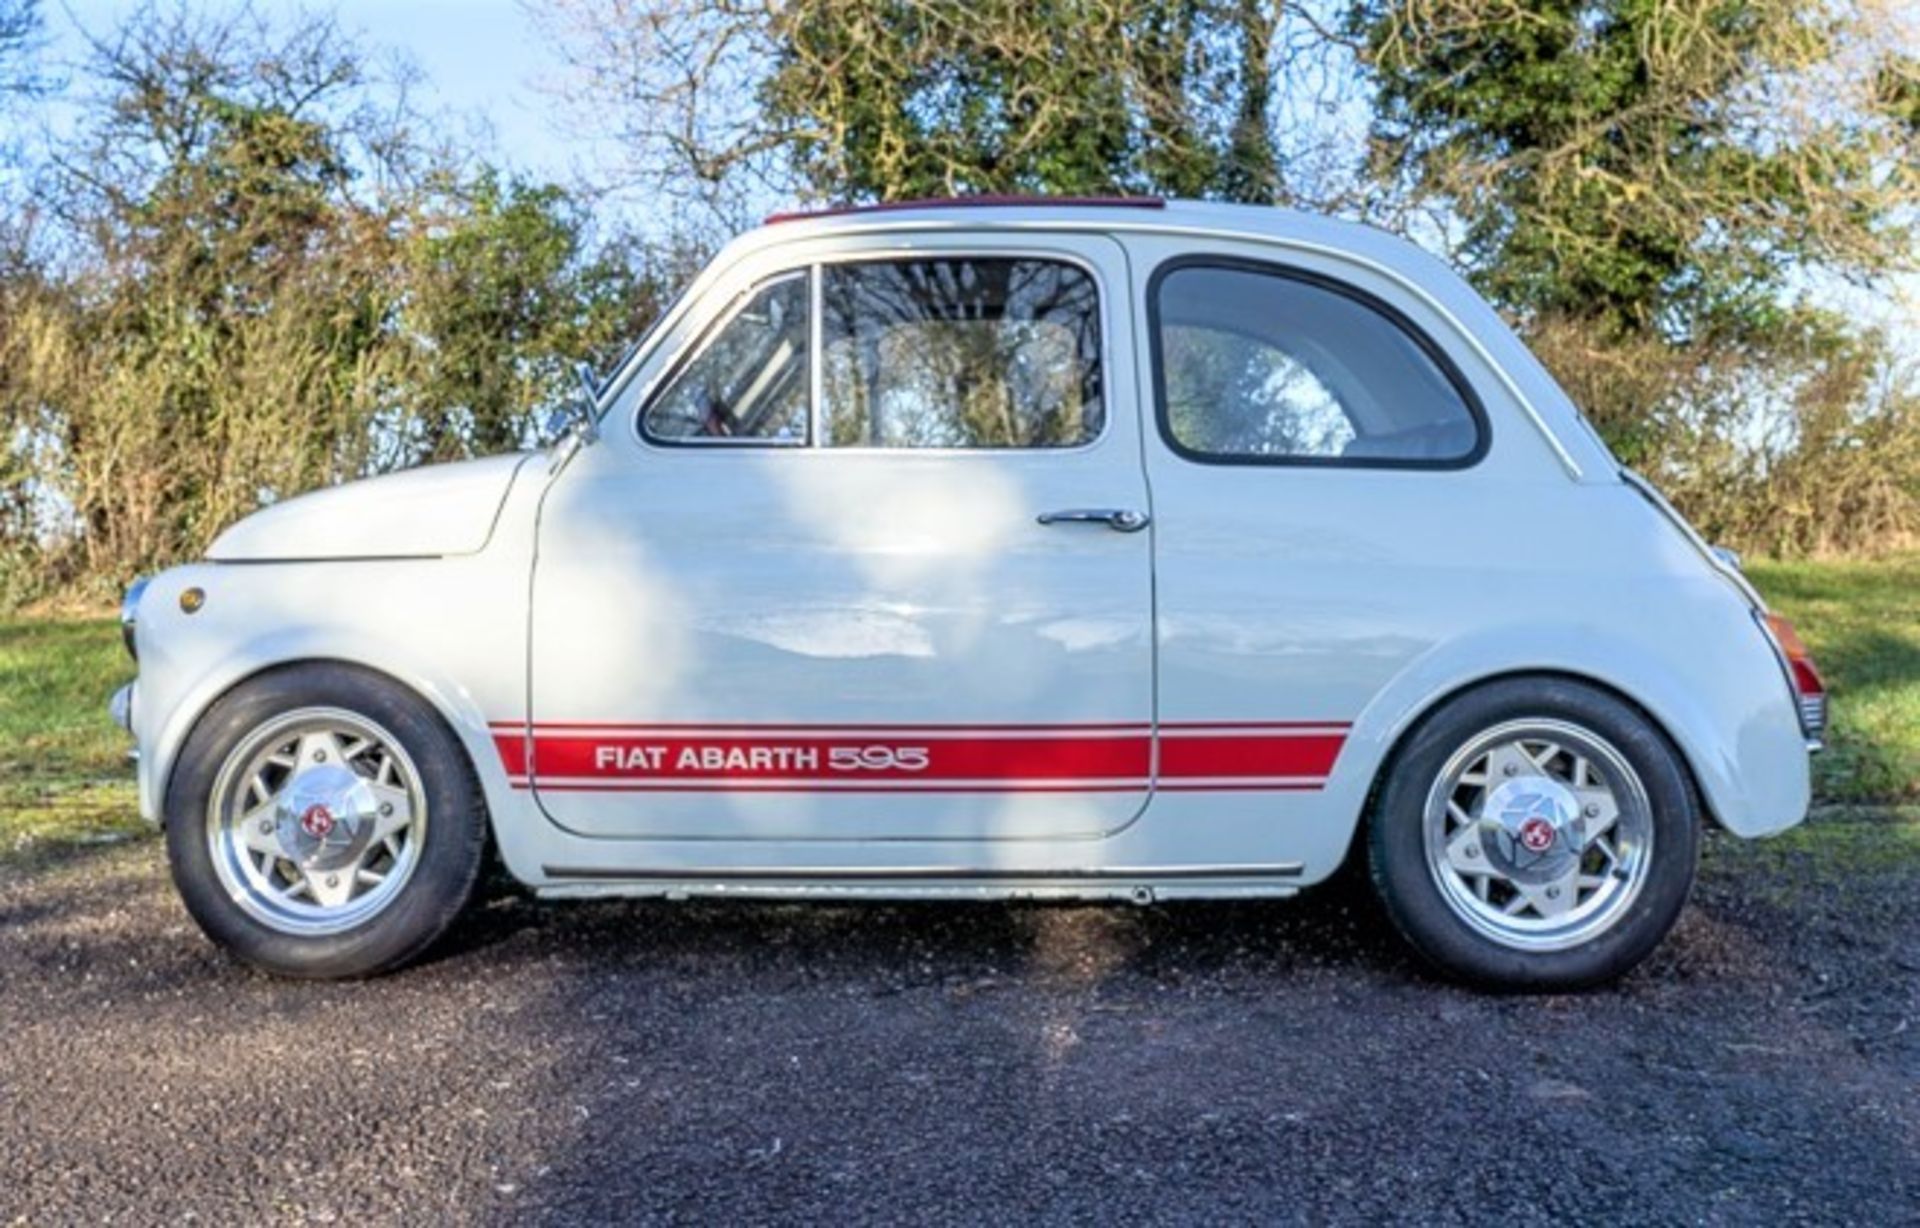 1972 FIAT 500 ABARTH TRIBUTE Registration Number: FHH 453K             Chassis Number: TBA - Image 2 of 16